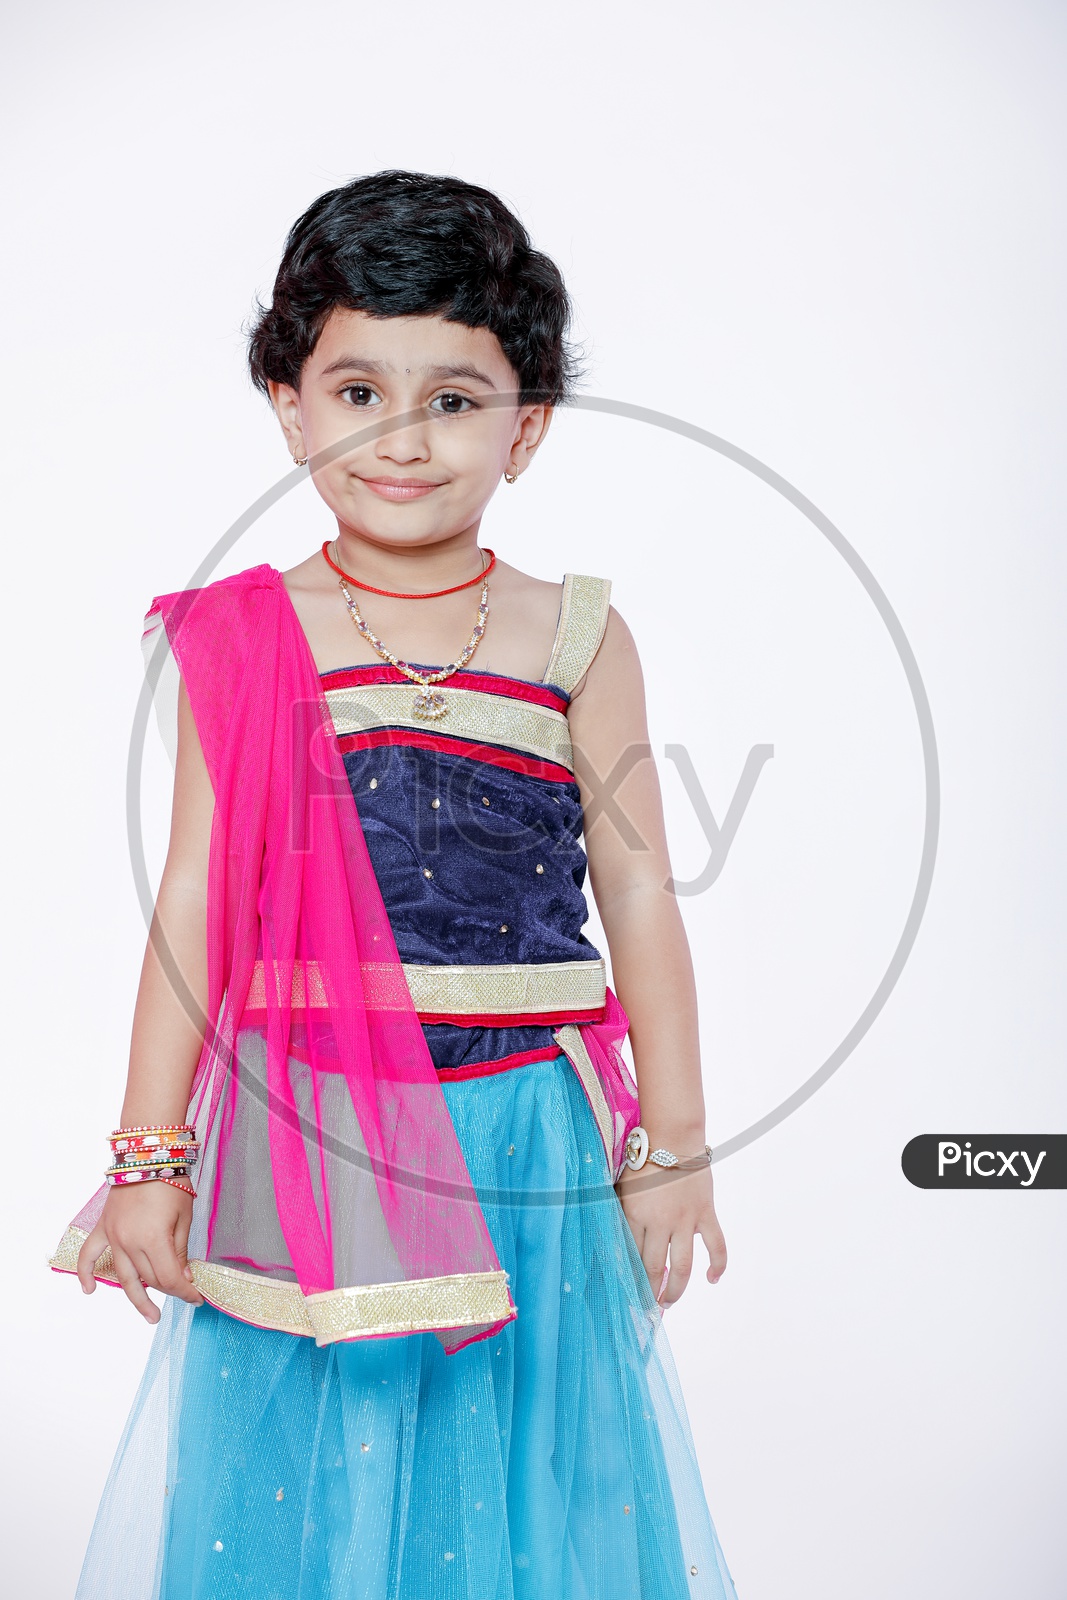 Indian Girl Child  on a Isolated White Background with a Smiling Face